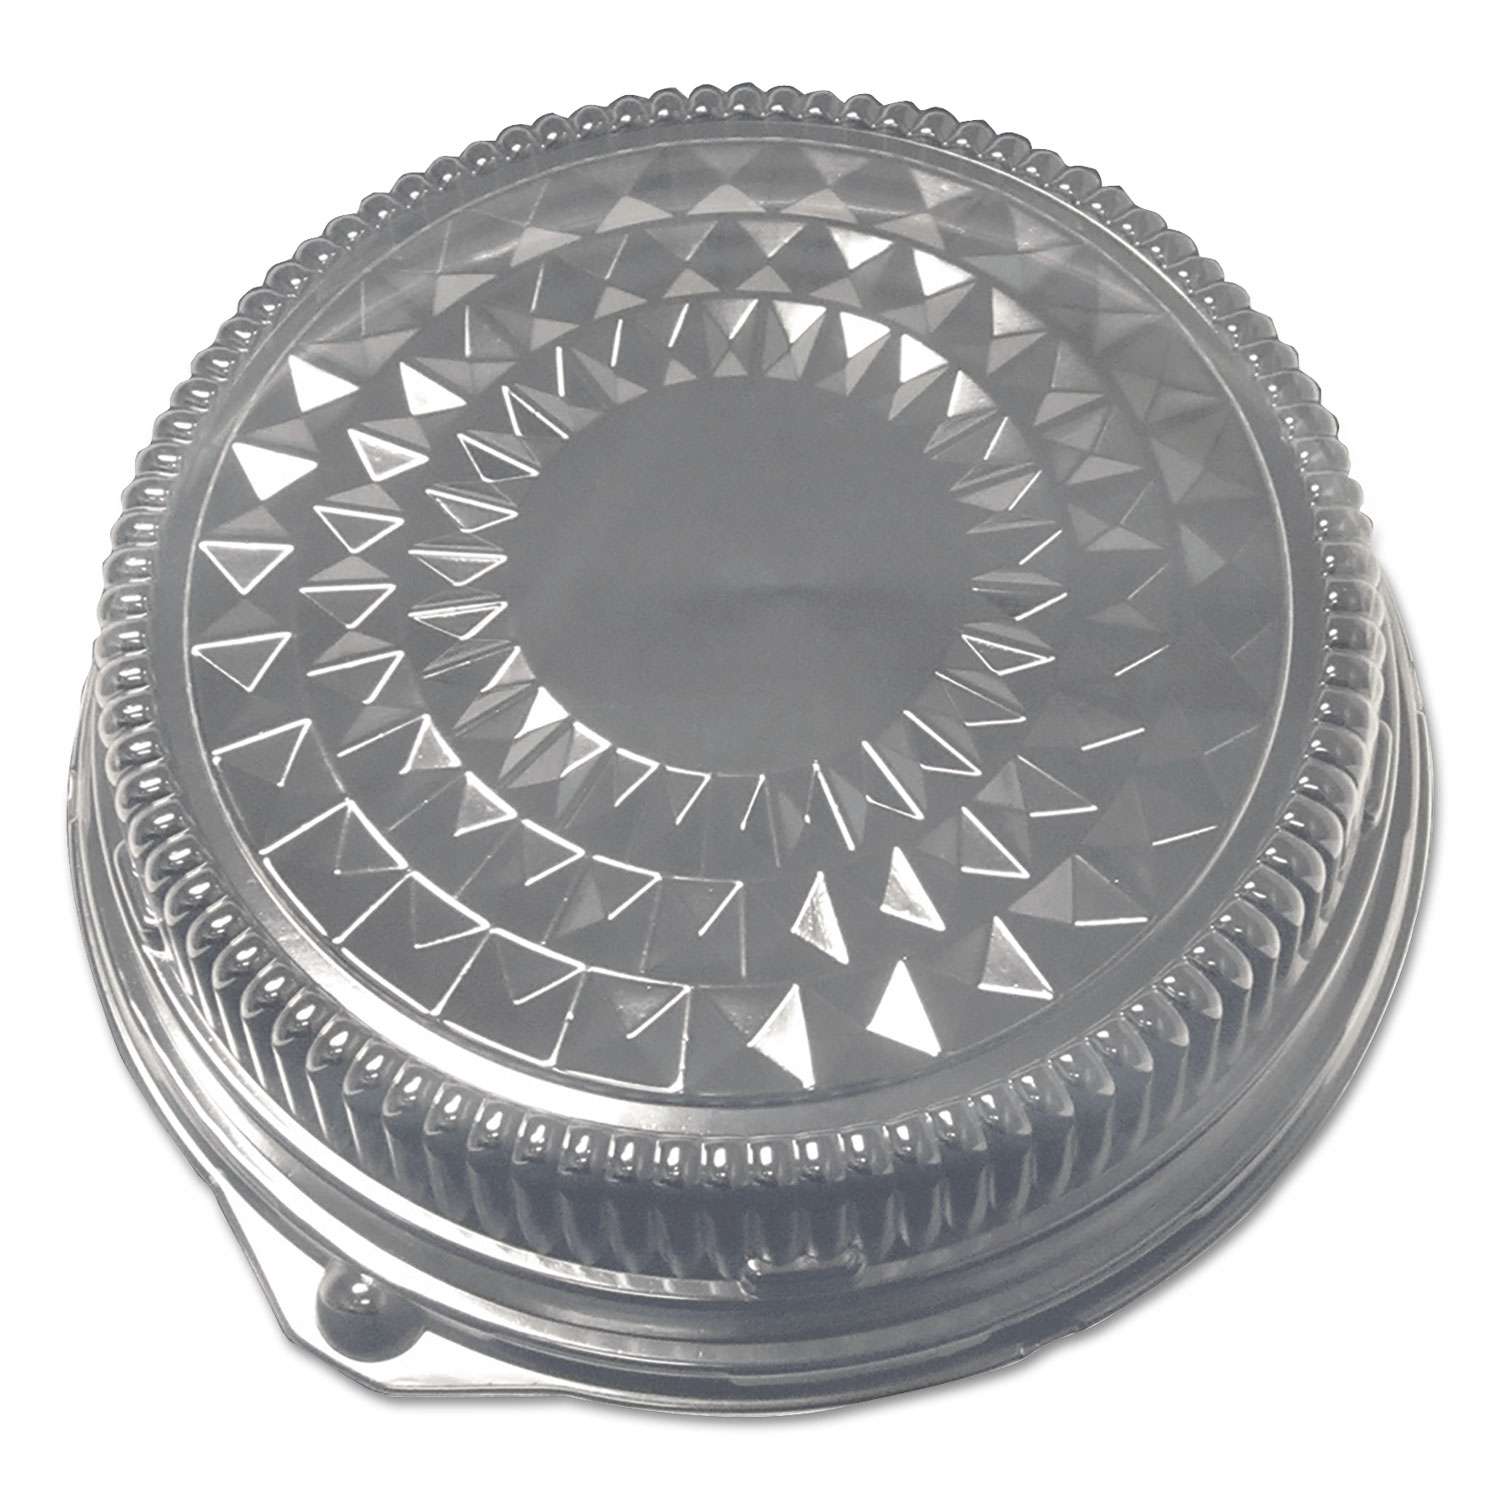  Durable Packaging 12DL Dome Lids for 12 Cater Trays, 50/Carton (DPK12DL) 